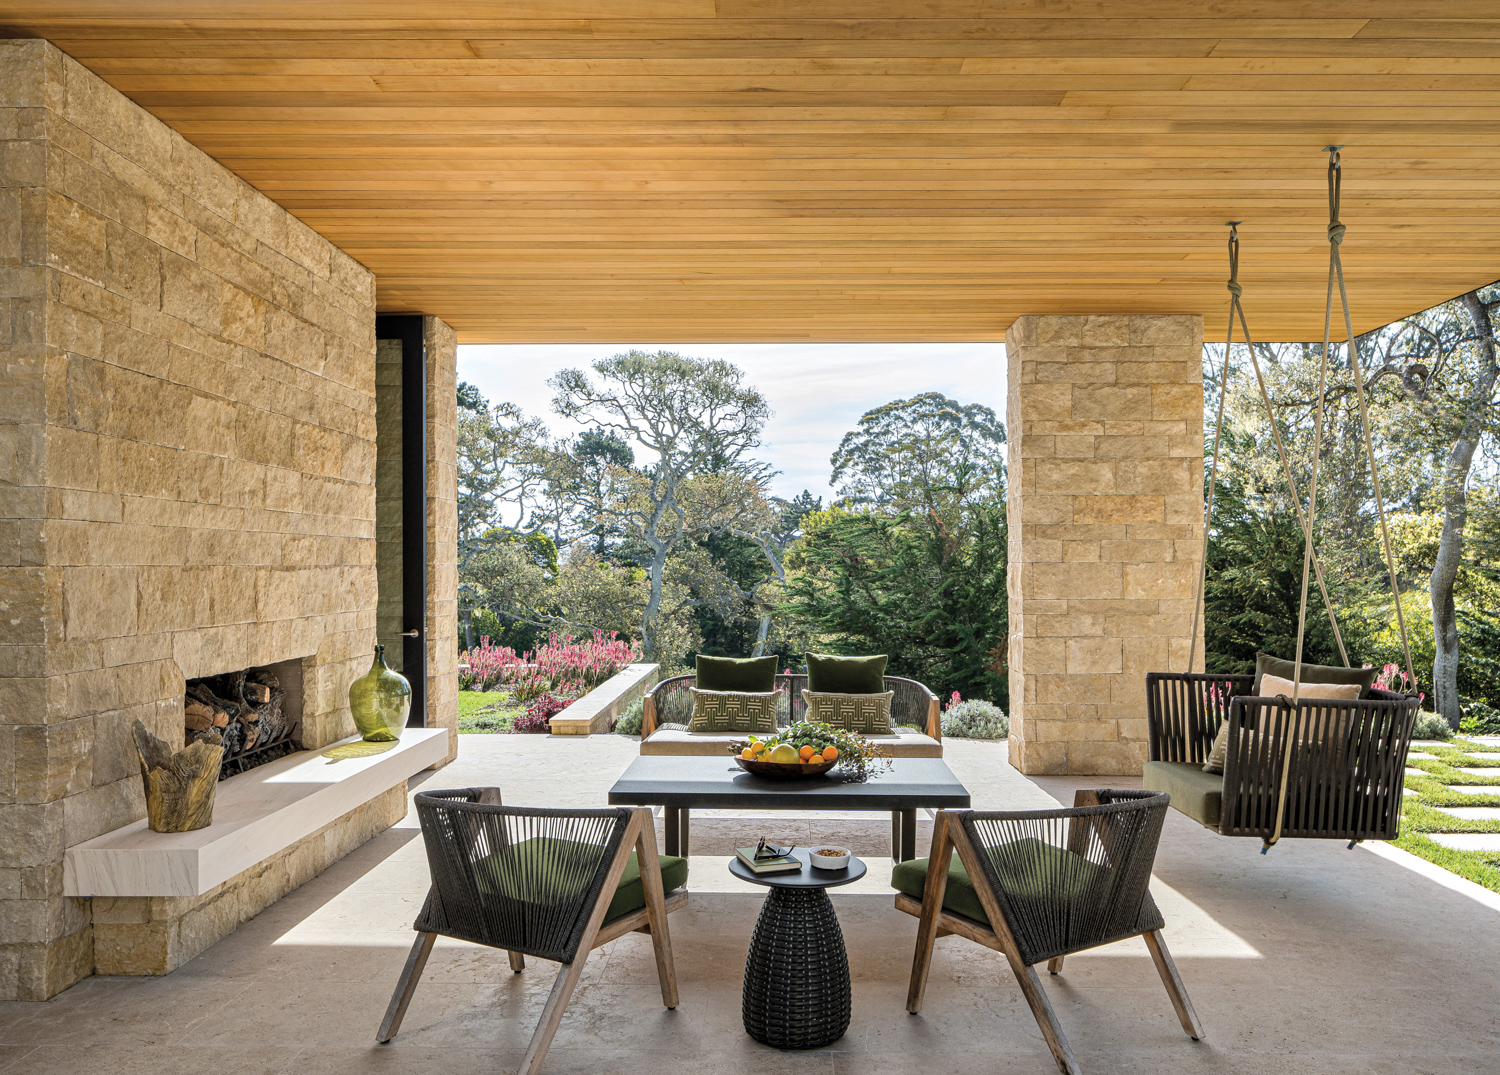 A shaded outdoor patio has...